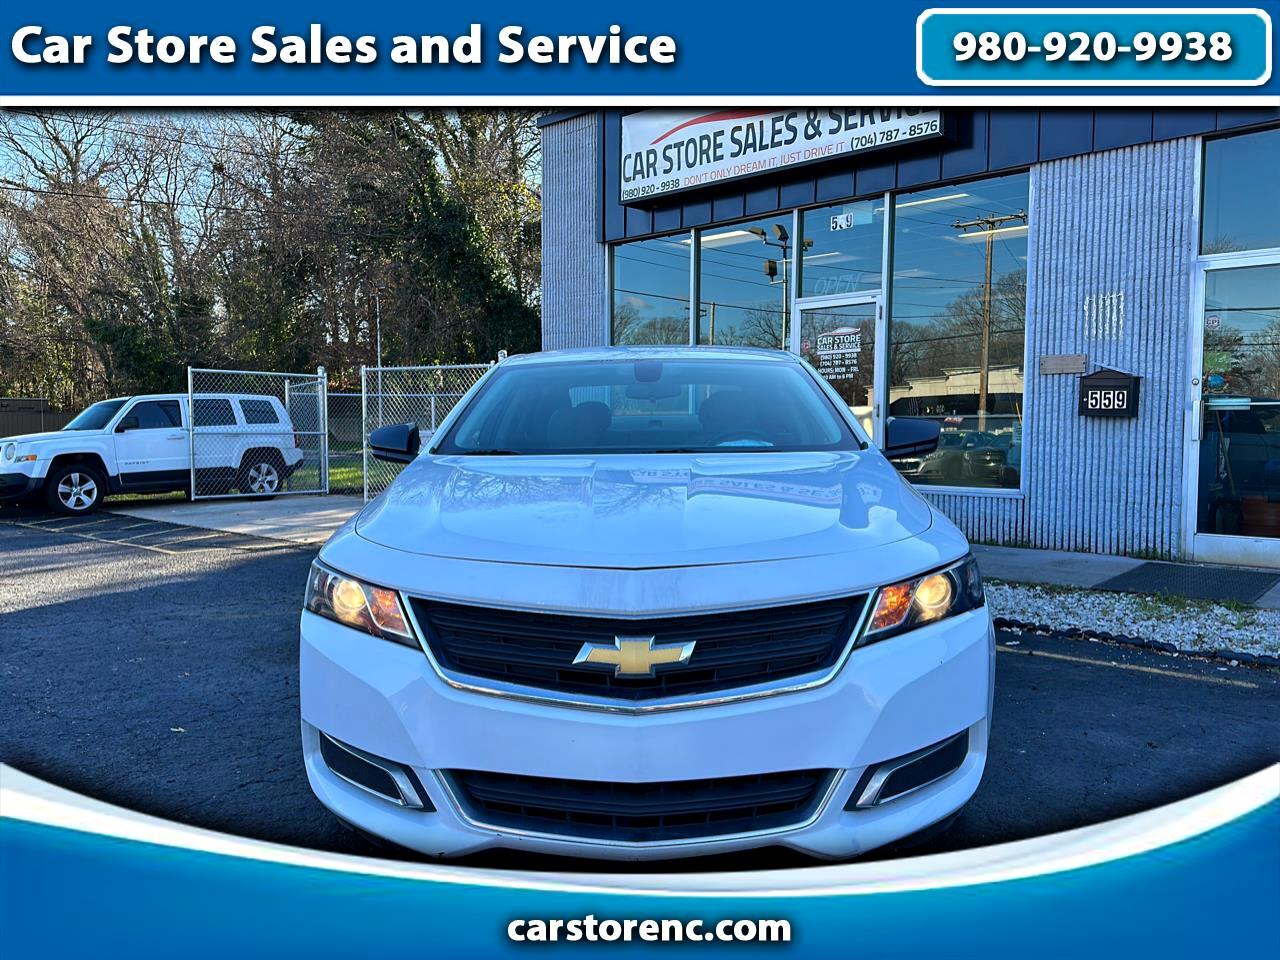 Used Cars for Sale North Concord NC 28025 Car Store Sales and Service